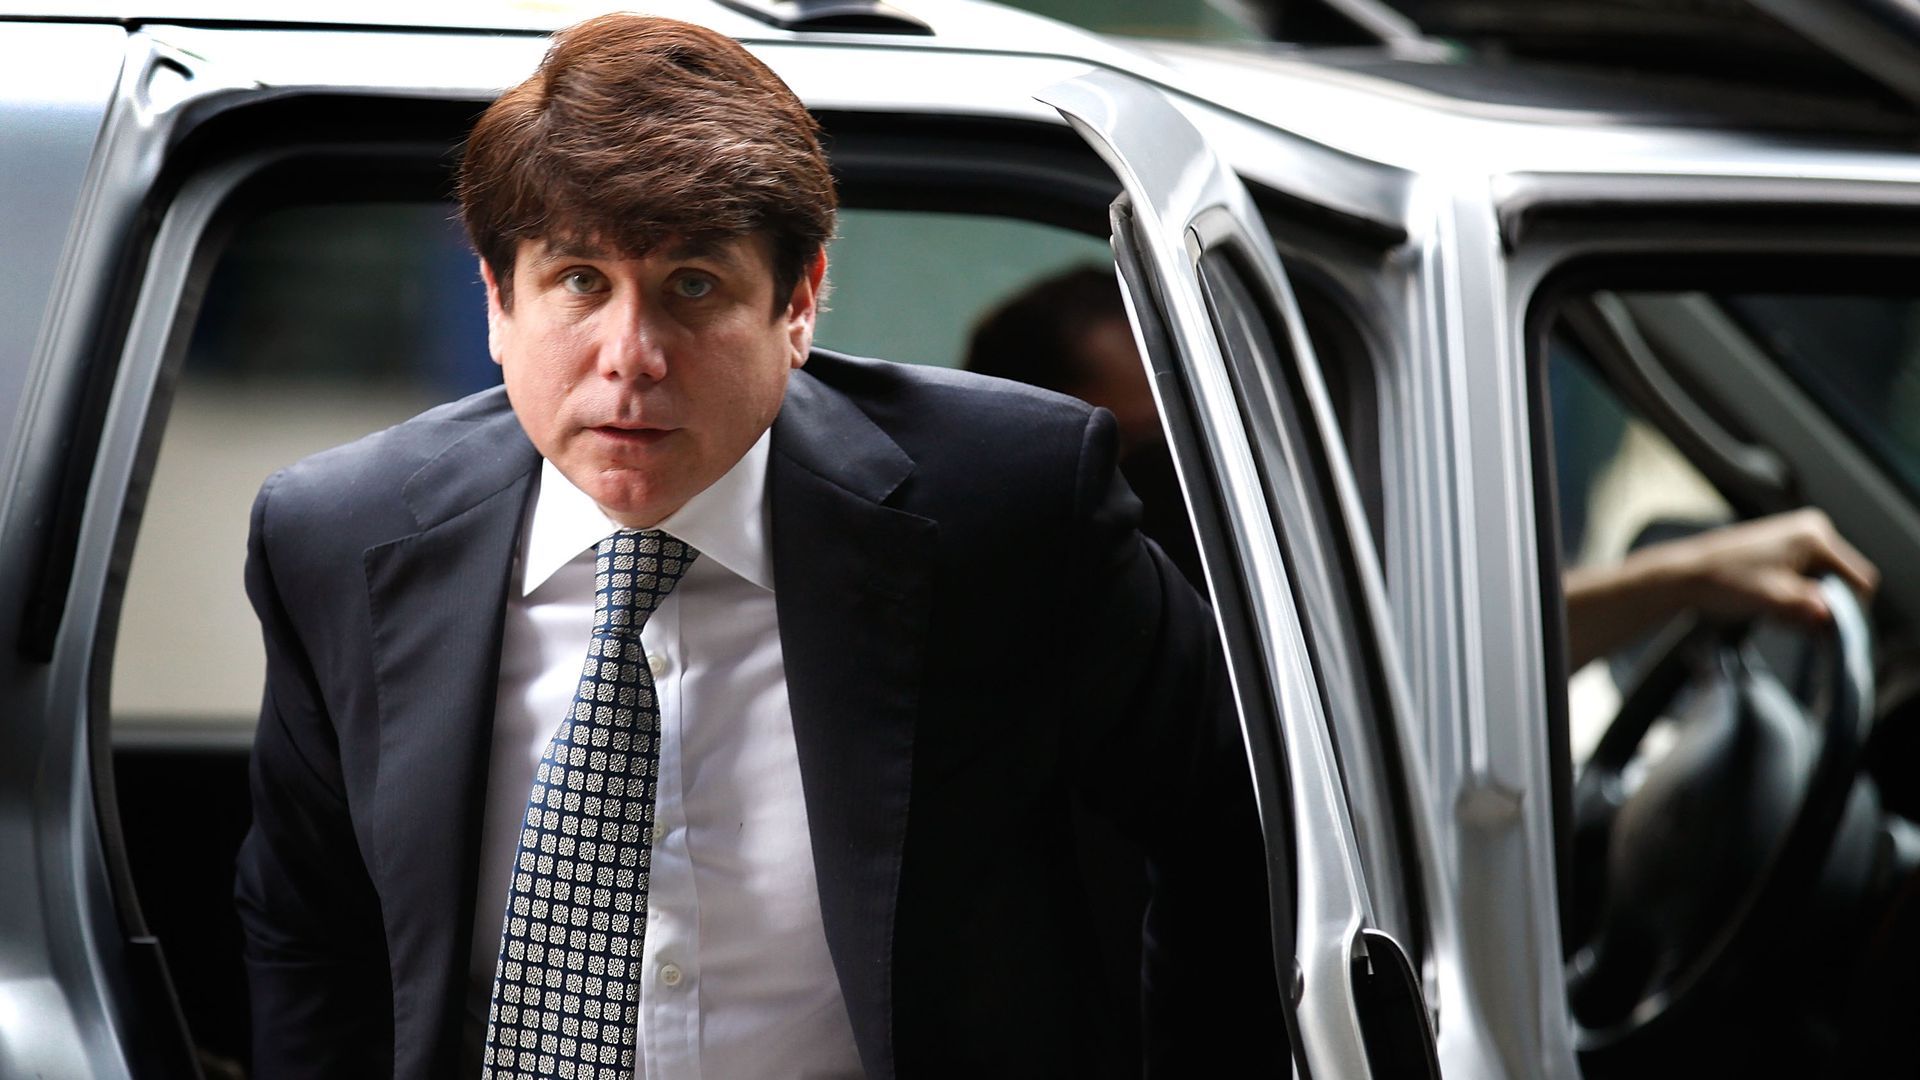 Rod Blagojevich in 2010